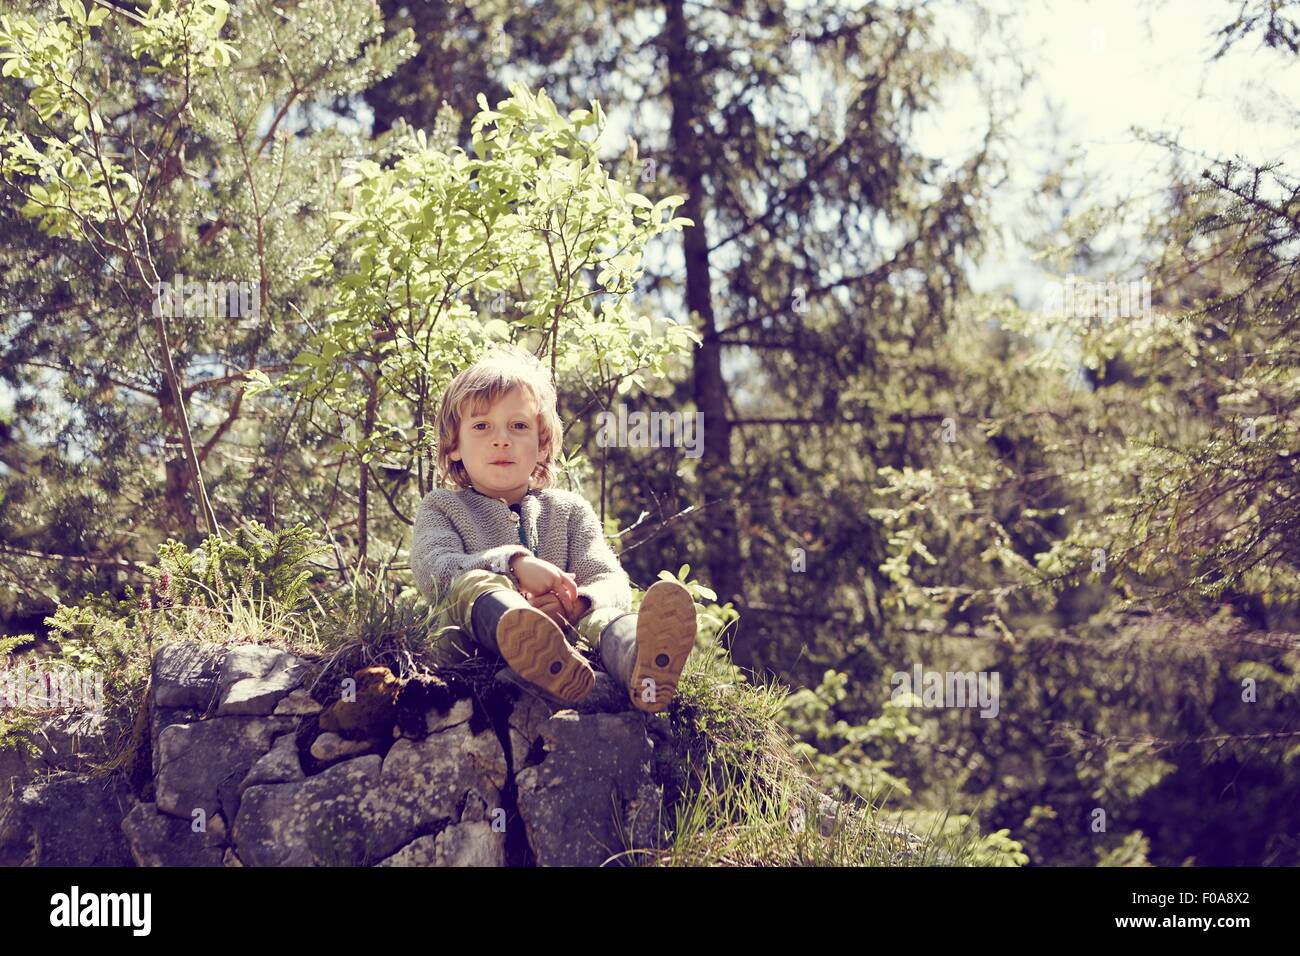 Young boy relaxing on rocks in forest Stock Photo